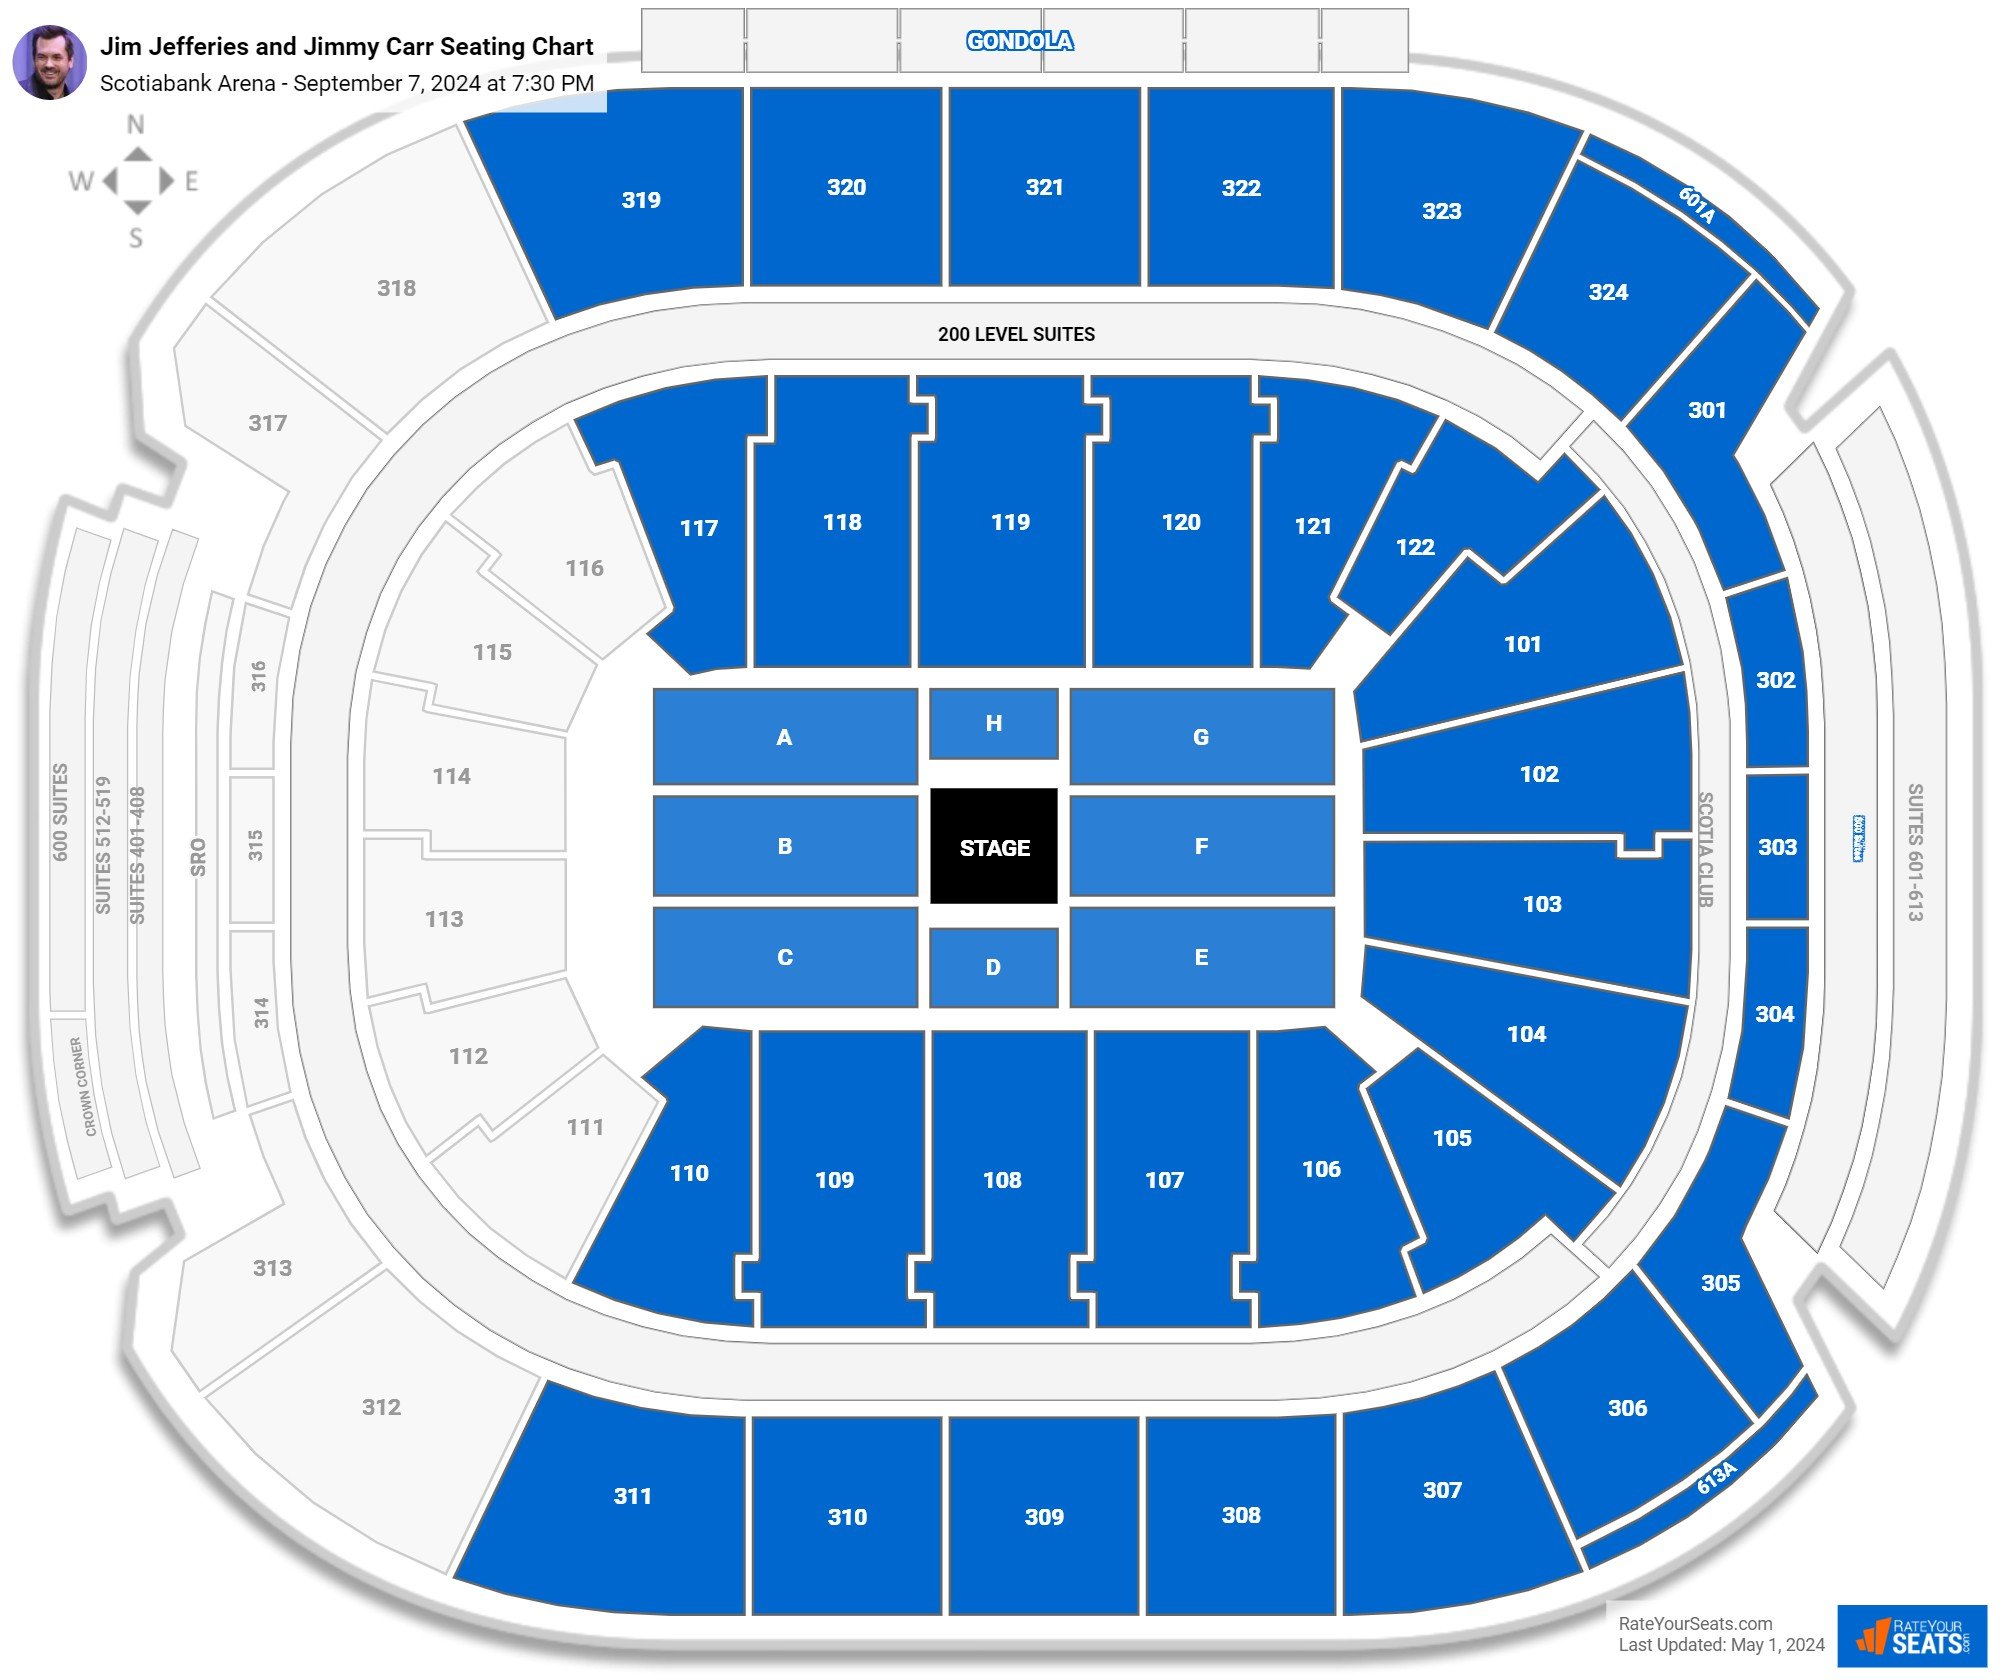 Jim Jefferies and Jimmy Carr seating chart Scotiabank Arena